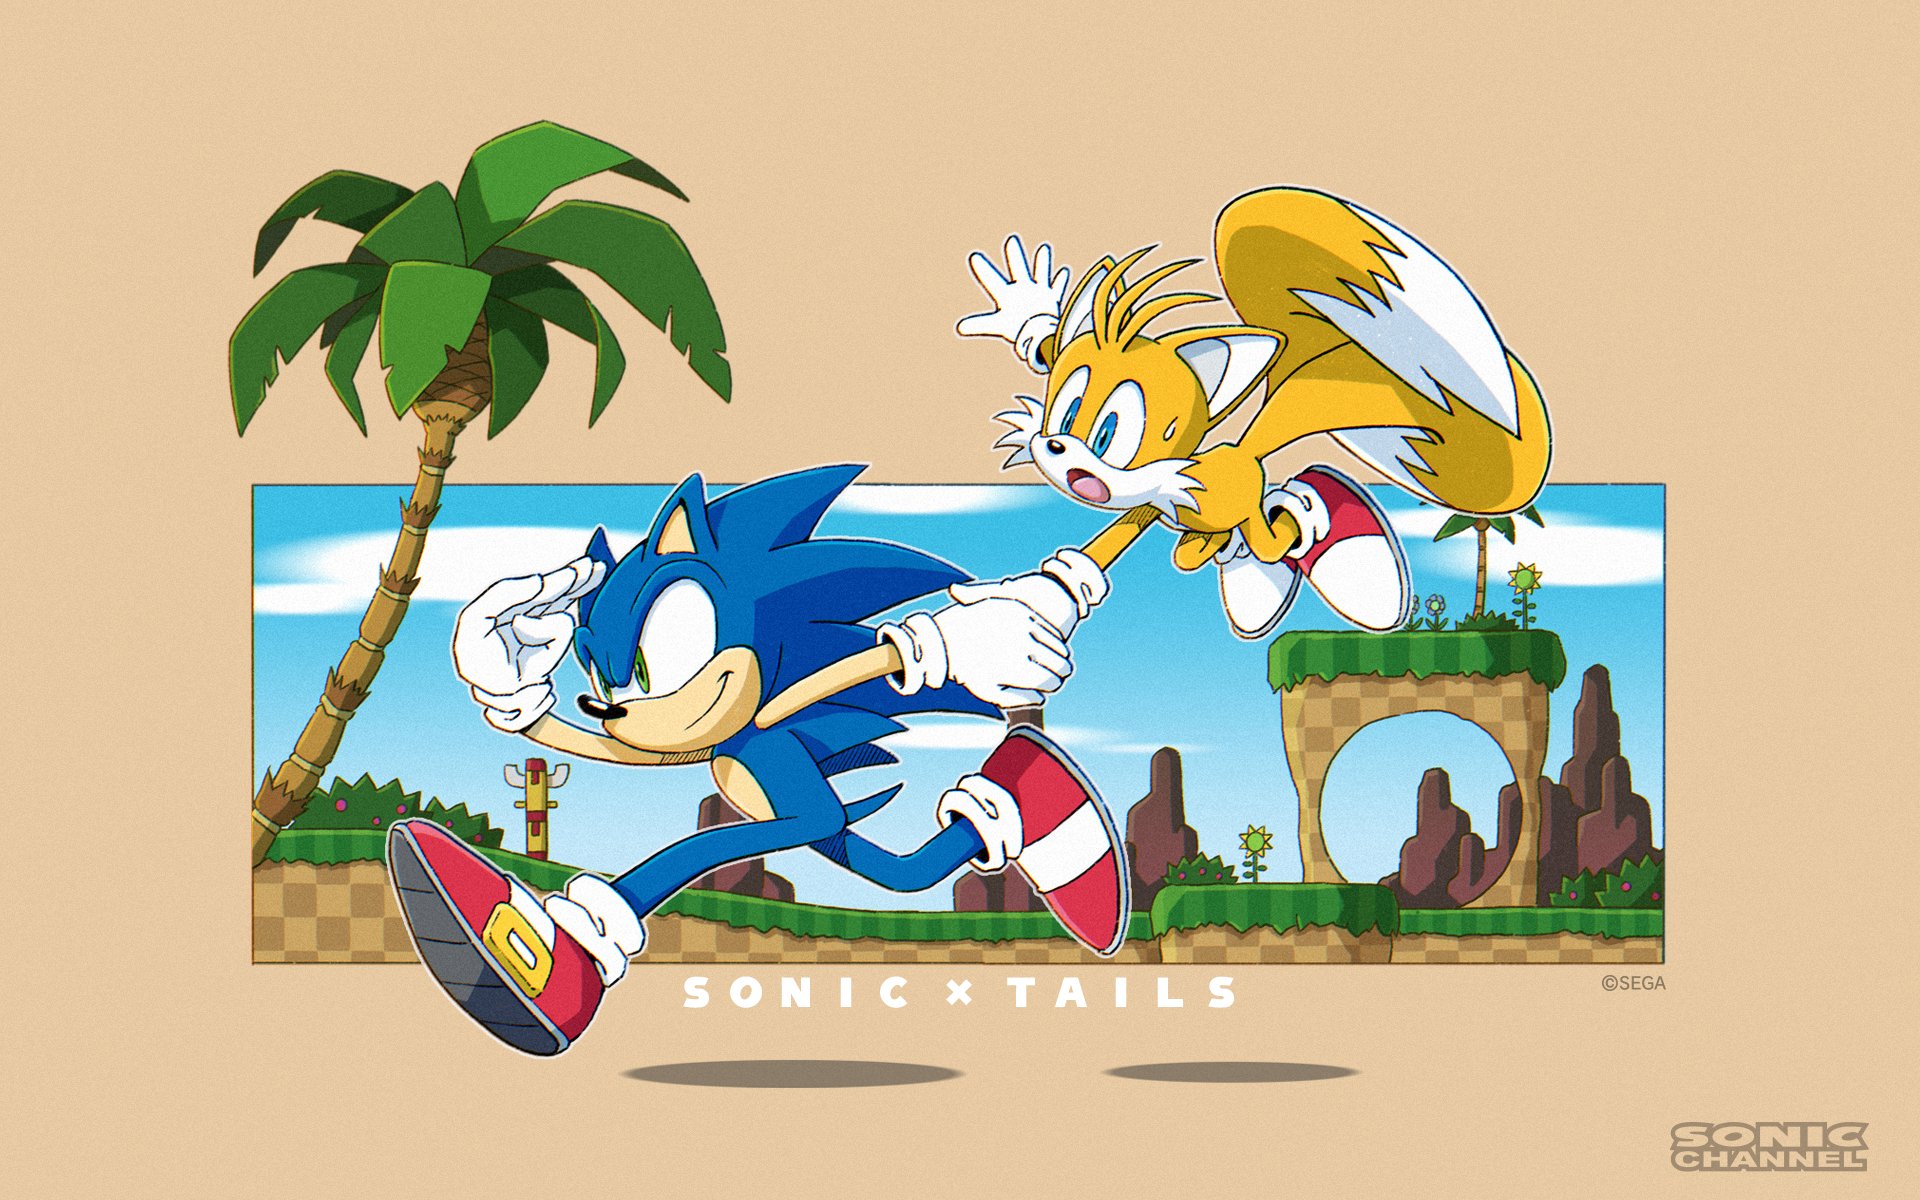 video game, sonic the hedgehog, blue eyes, green eyes, miles 'tails' prower, sneakers, sonic channel, sonic